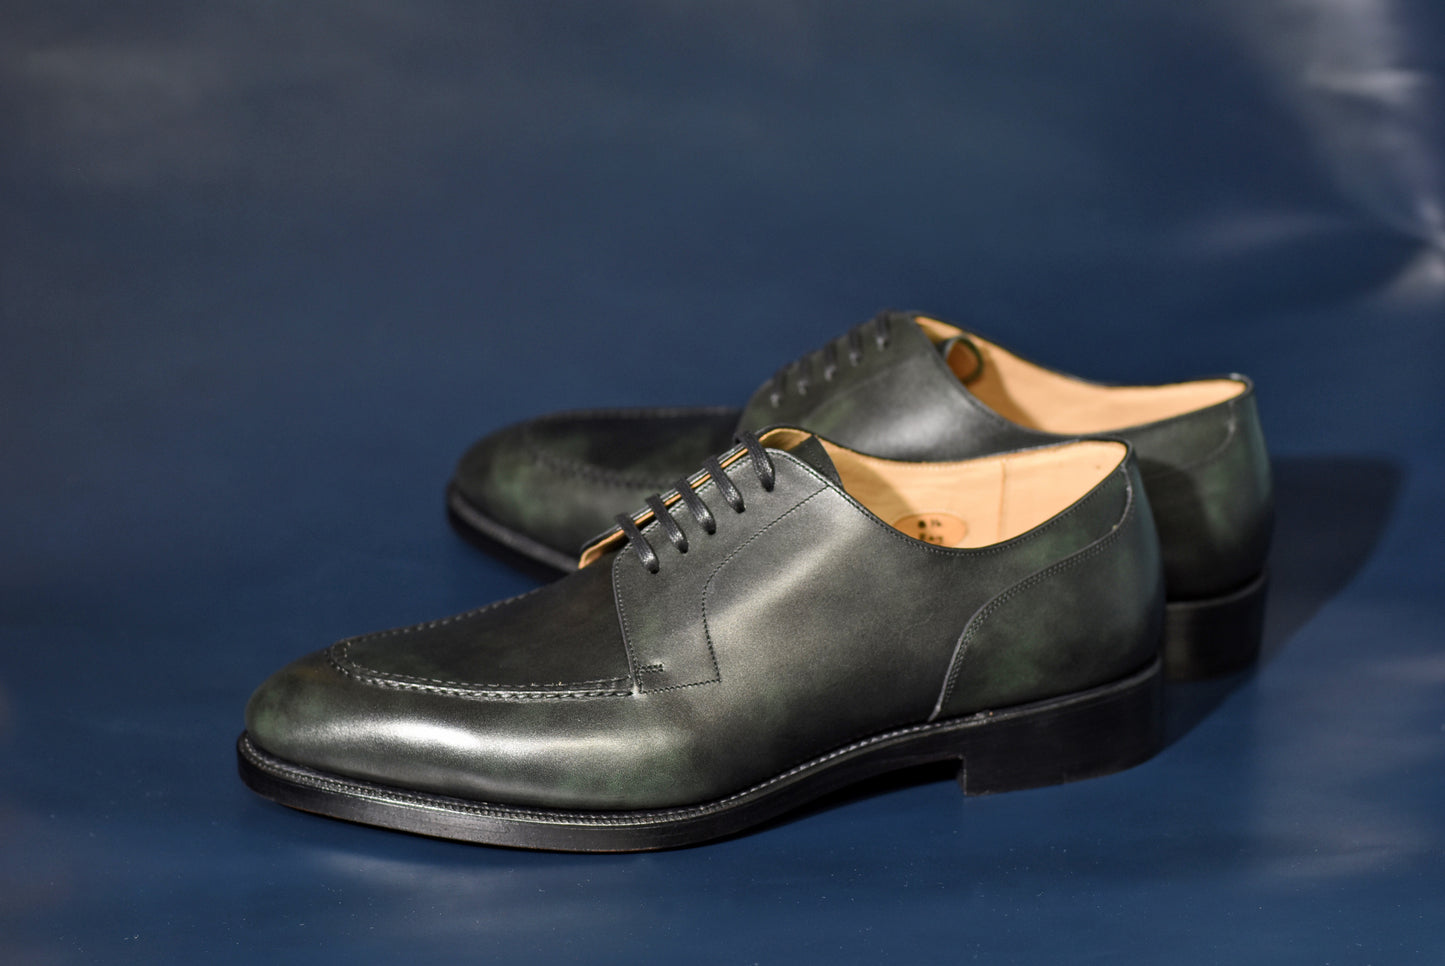 ★London Super Trunk Show 2023 Anniversary Model★ “Ray” Pie Crust Apron Derby, Dark Green Dress Shoes, Zonta Museum Calf, Goodyear welted, US size 5 1/2 ~ 11